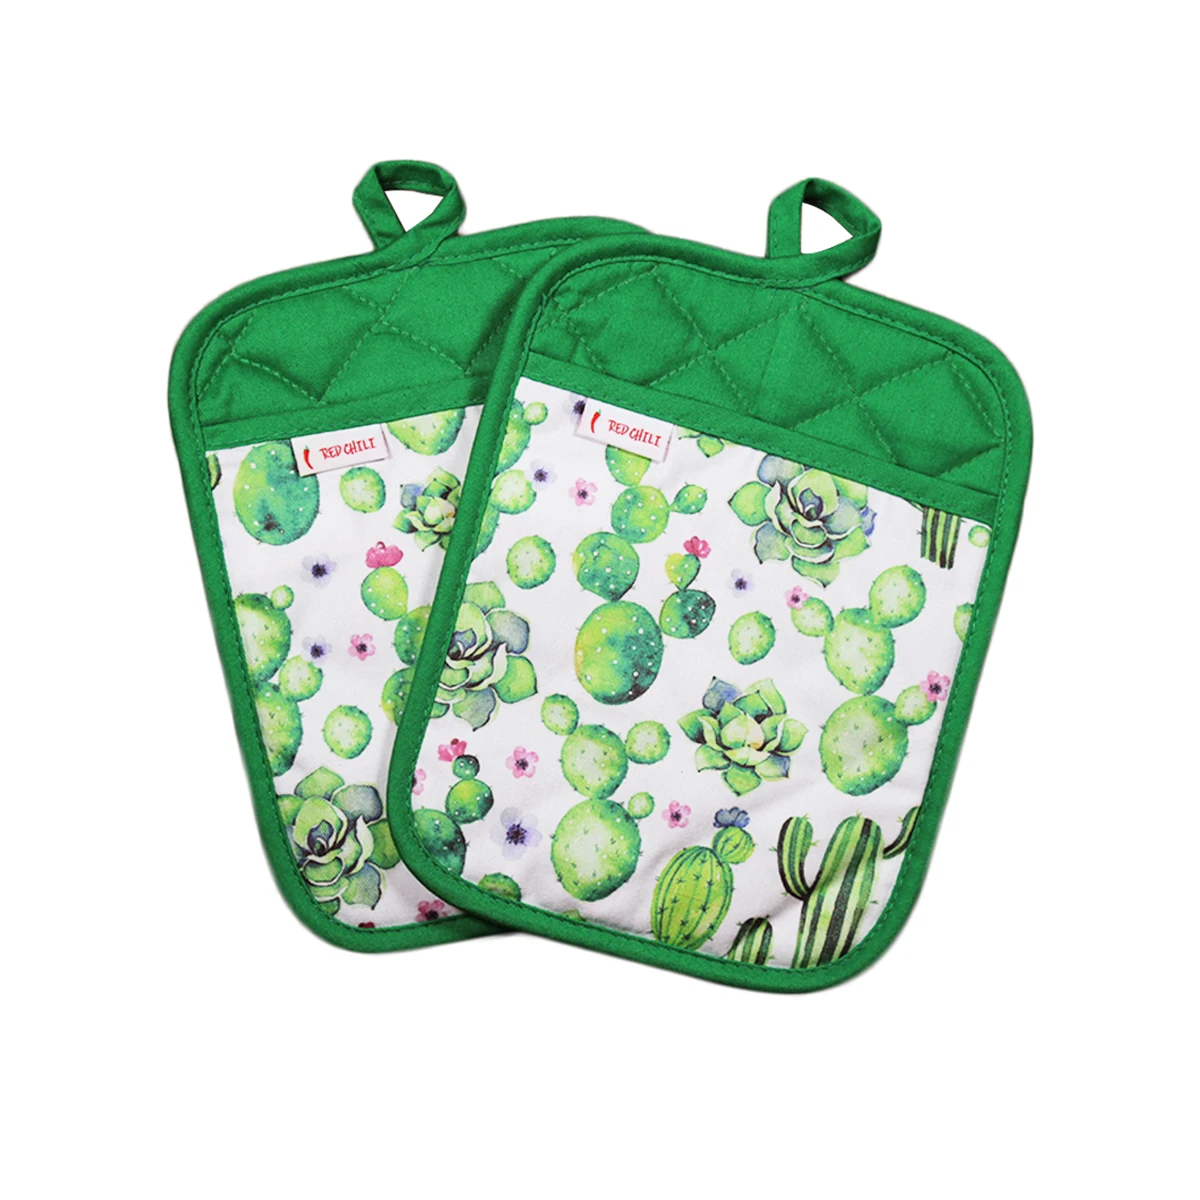 

Cactus design green cotton print cooking heat resistant oven mitts pot holders sets with pocket for kitchen